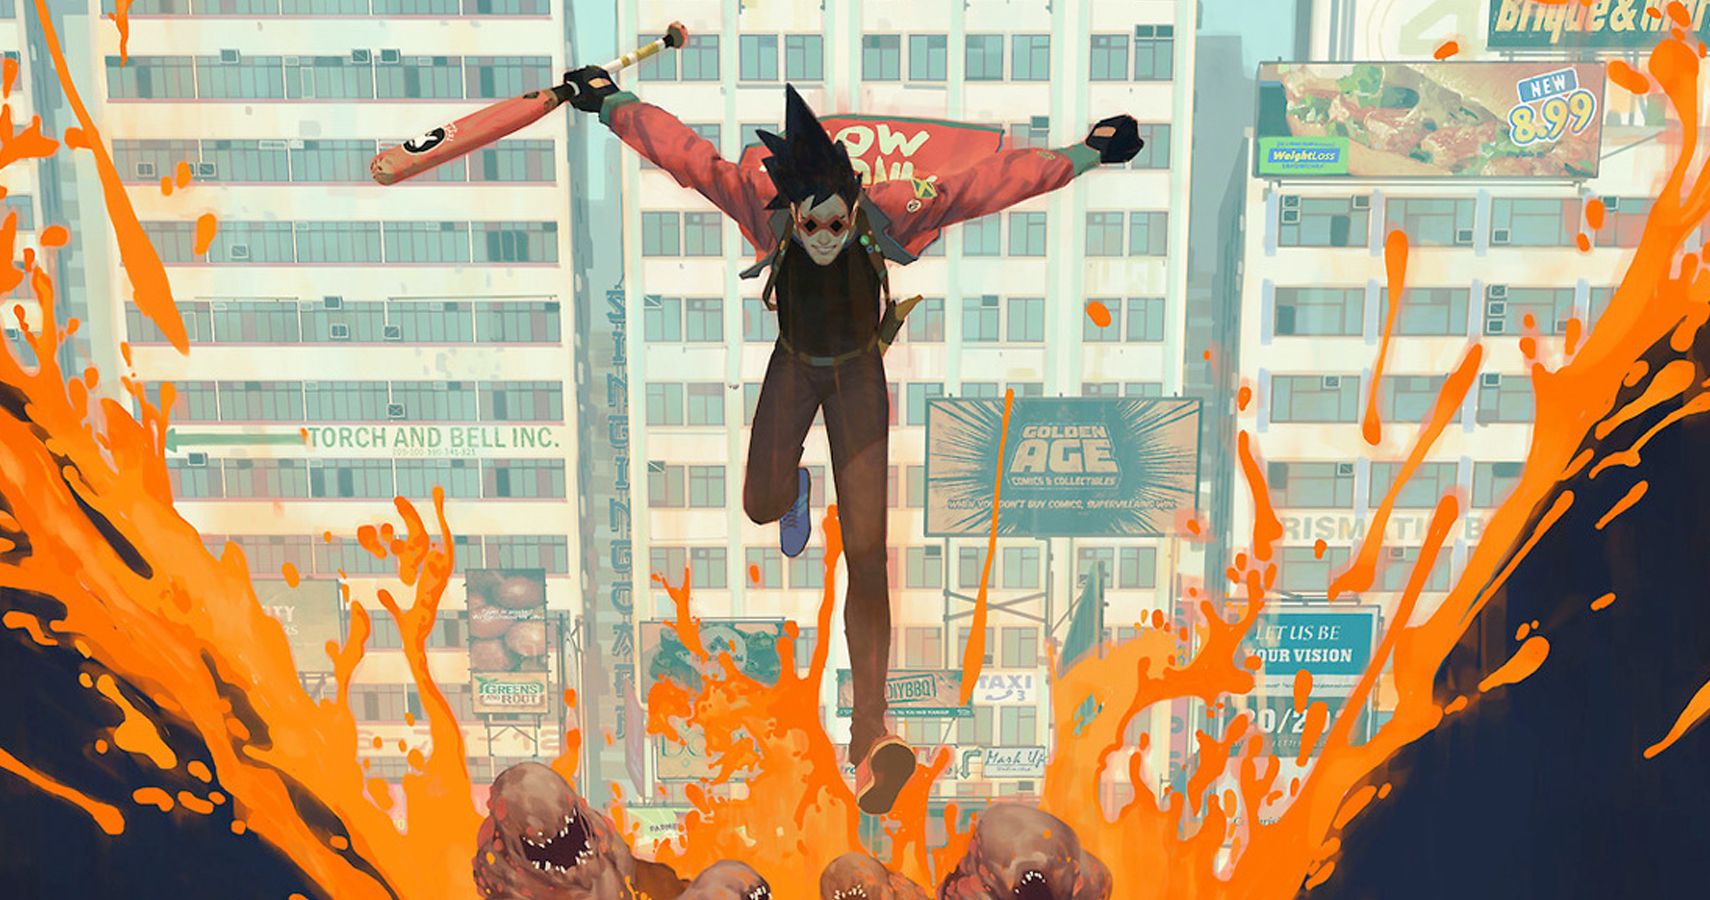 Sony registers trademark for Xbox and PC exclusive Sunset Overdrive